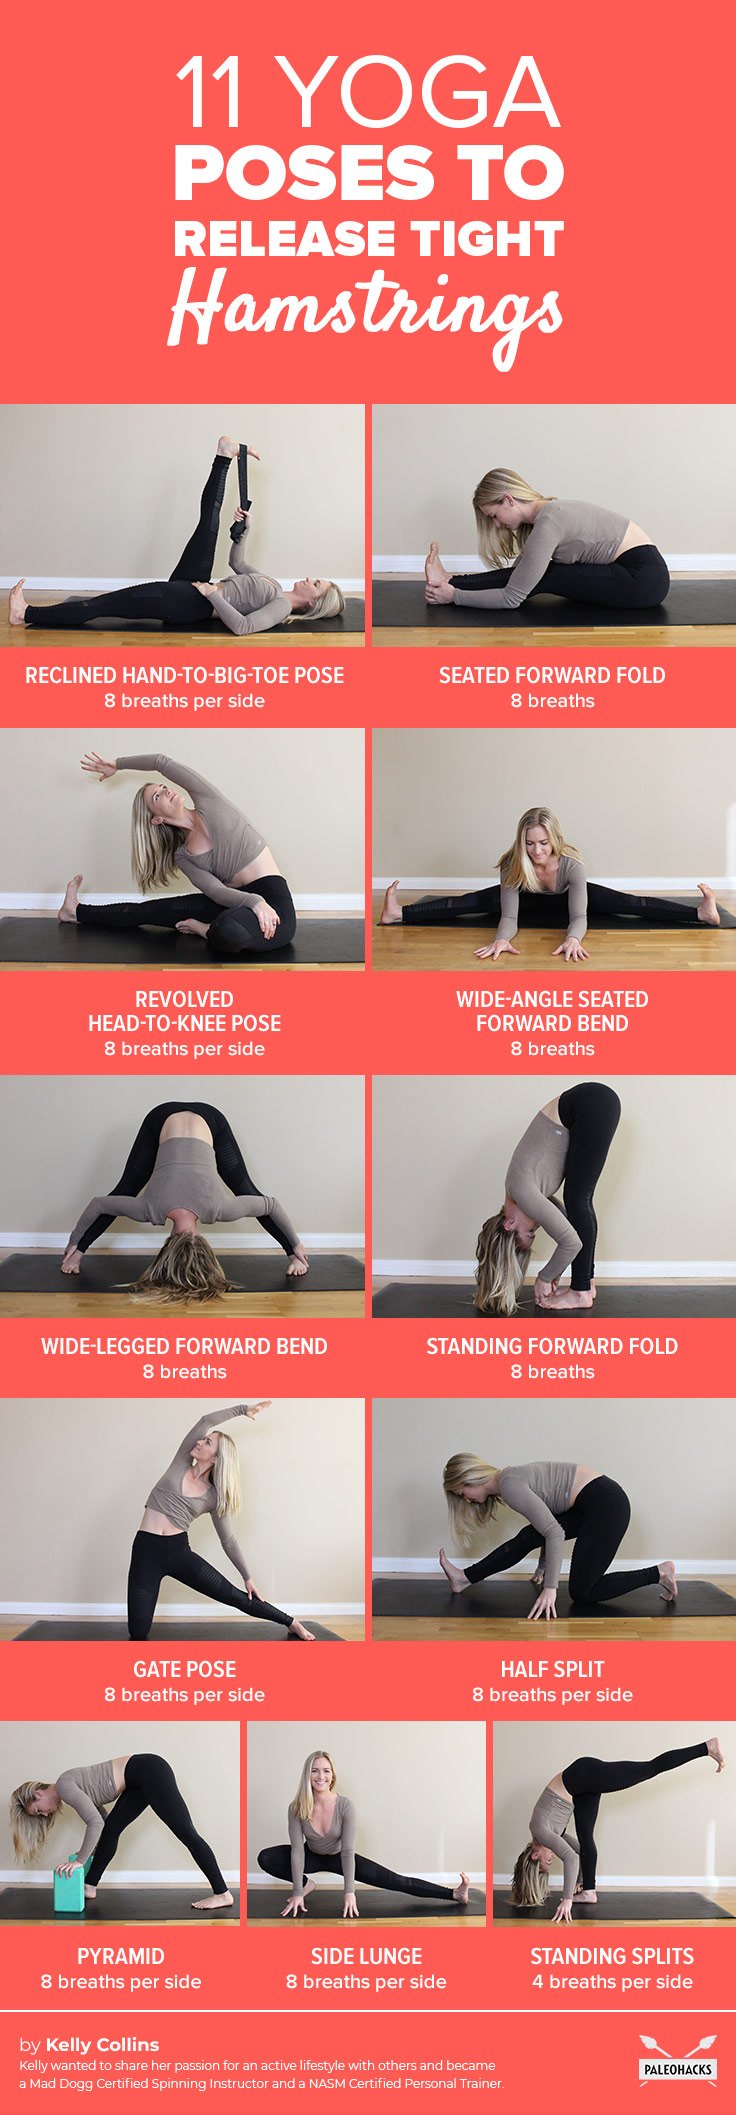 If you spend all day sitting, chances are you’ve experienced pain in your legs. Try these yoga poses to help release tight hamstrings.